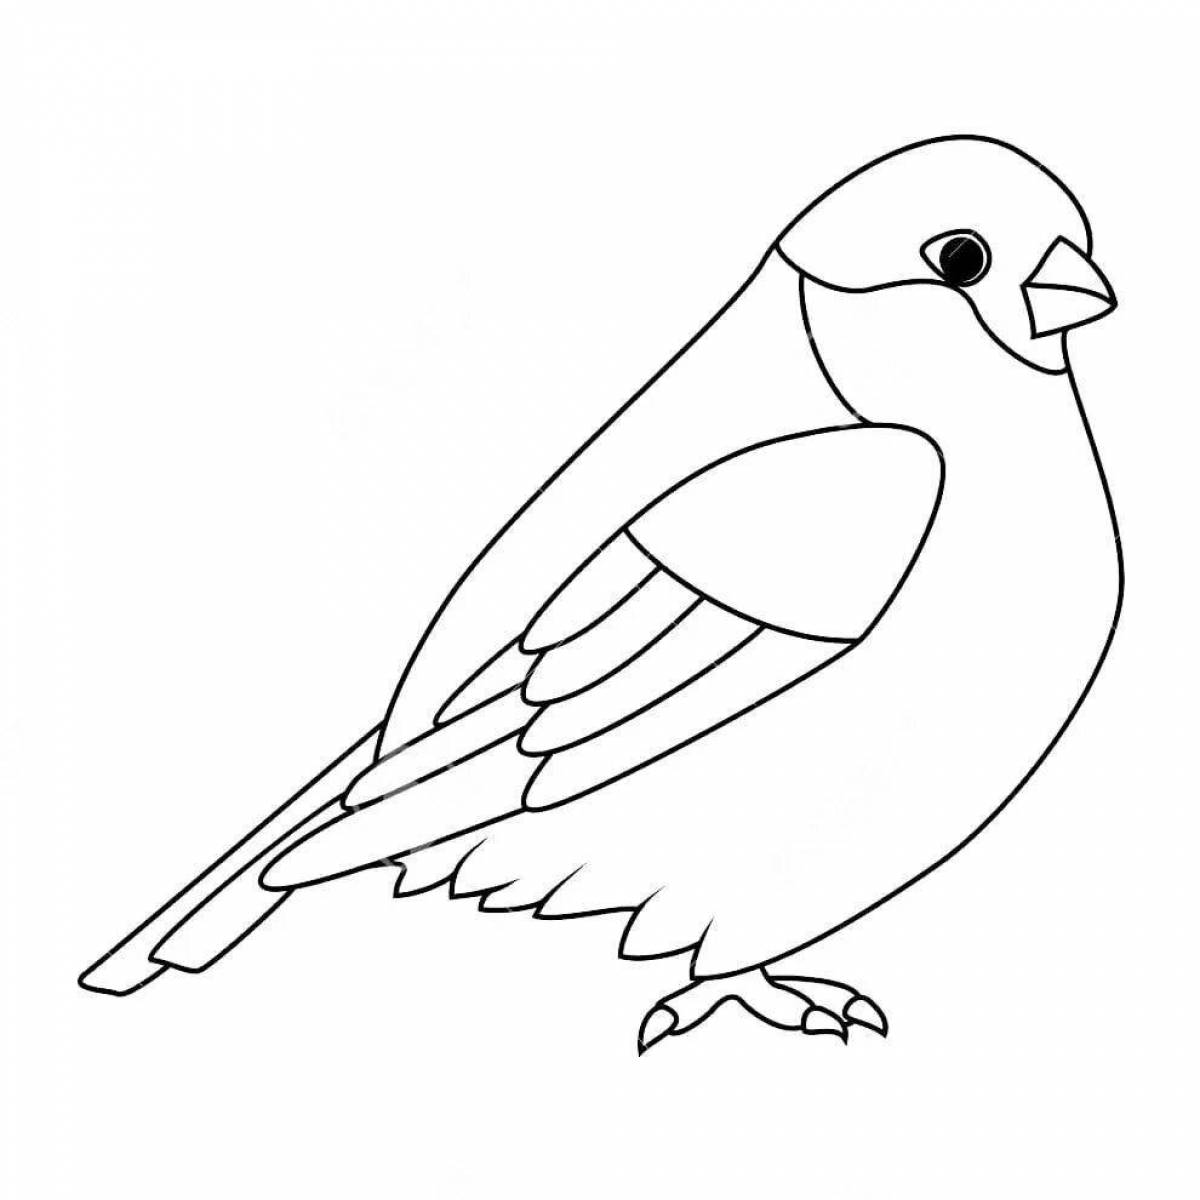 Coloring book dazzling titmouse